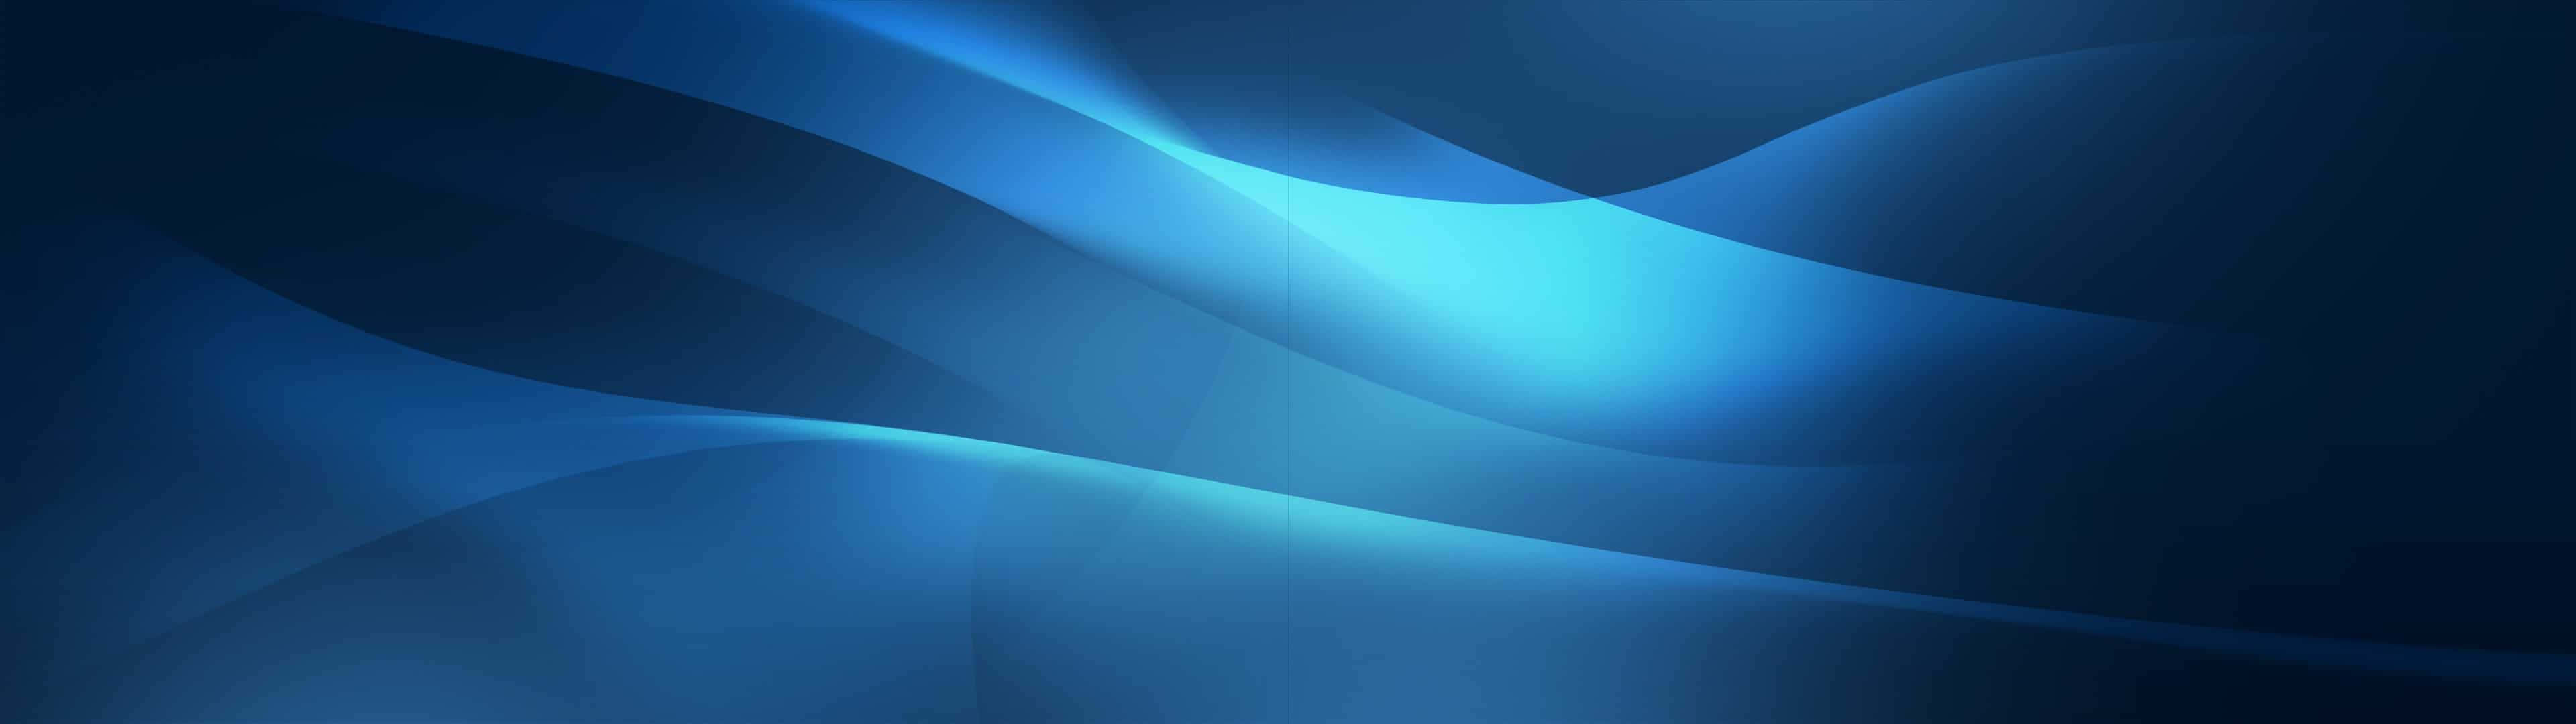 Blue Abstract Background With Waves